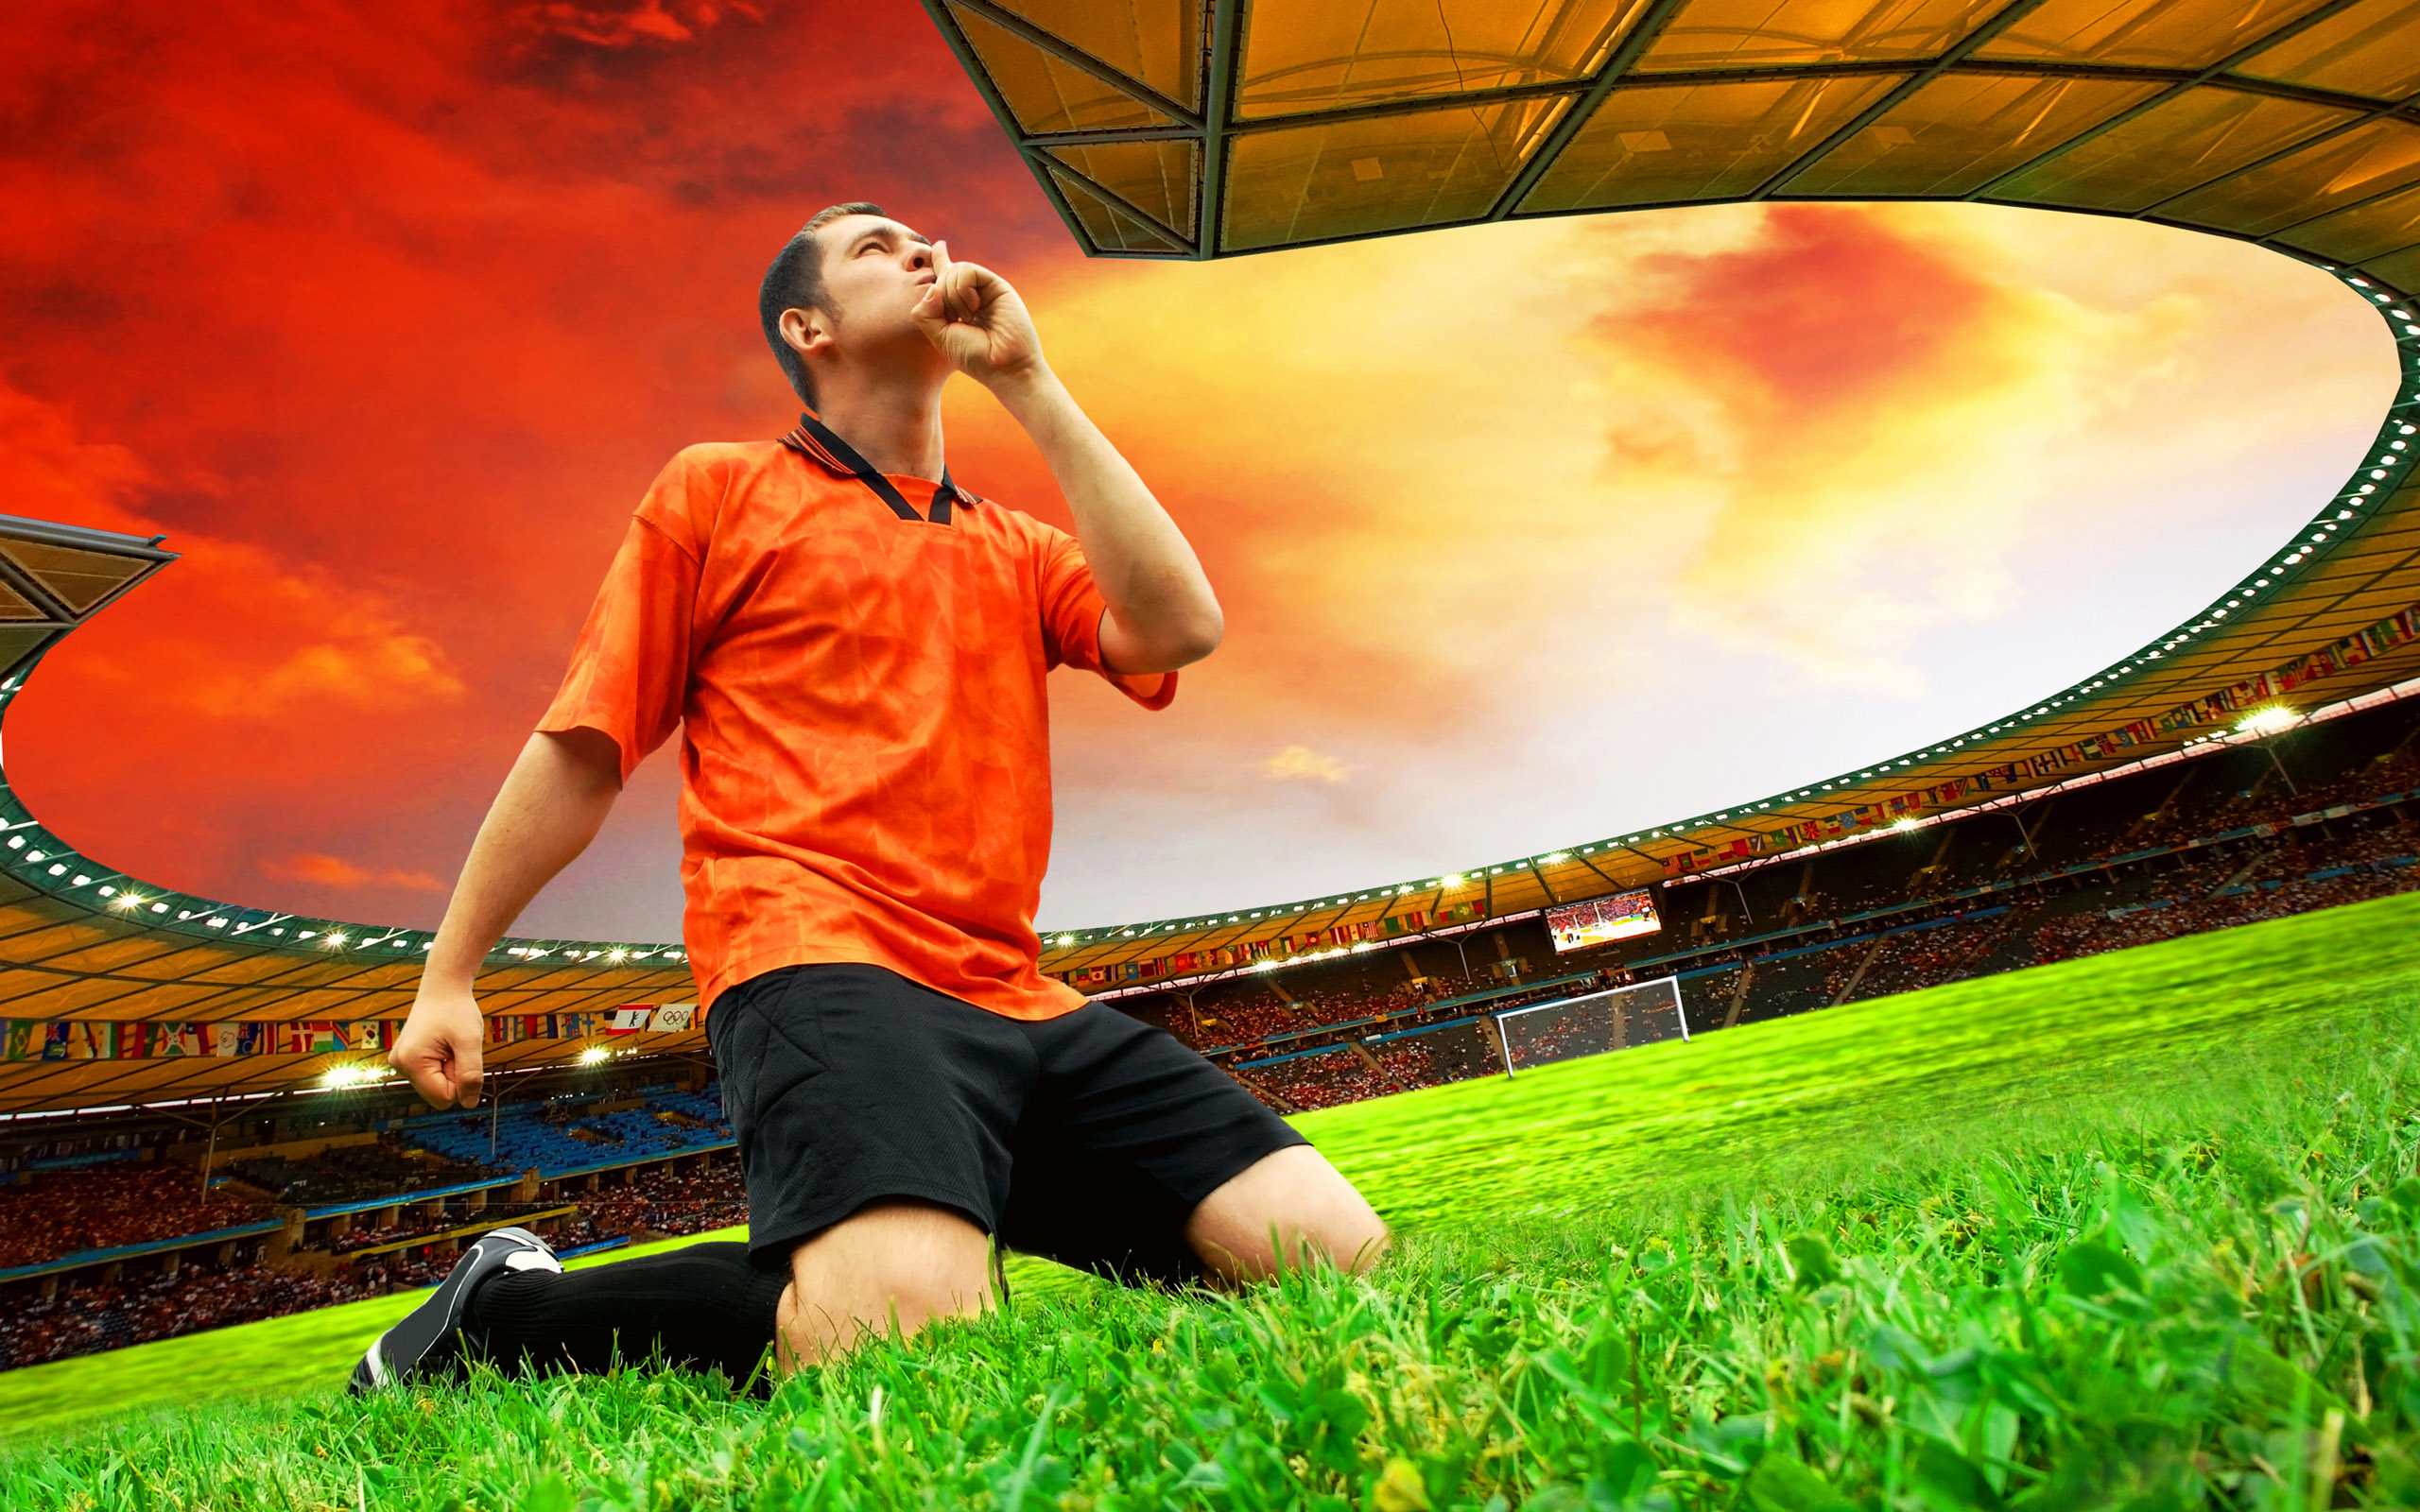 Download HQ Soccer on the lawn Football wallpaper / 2560x1600